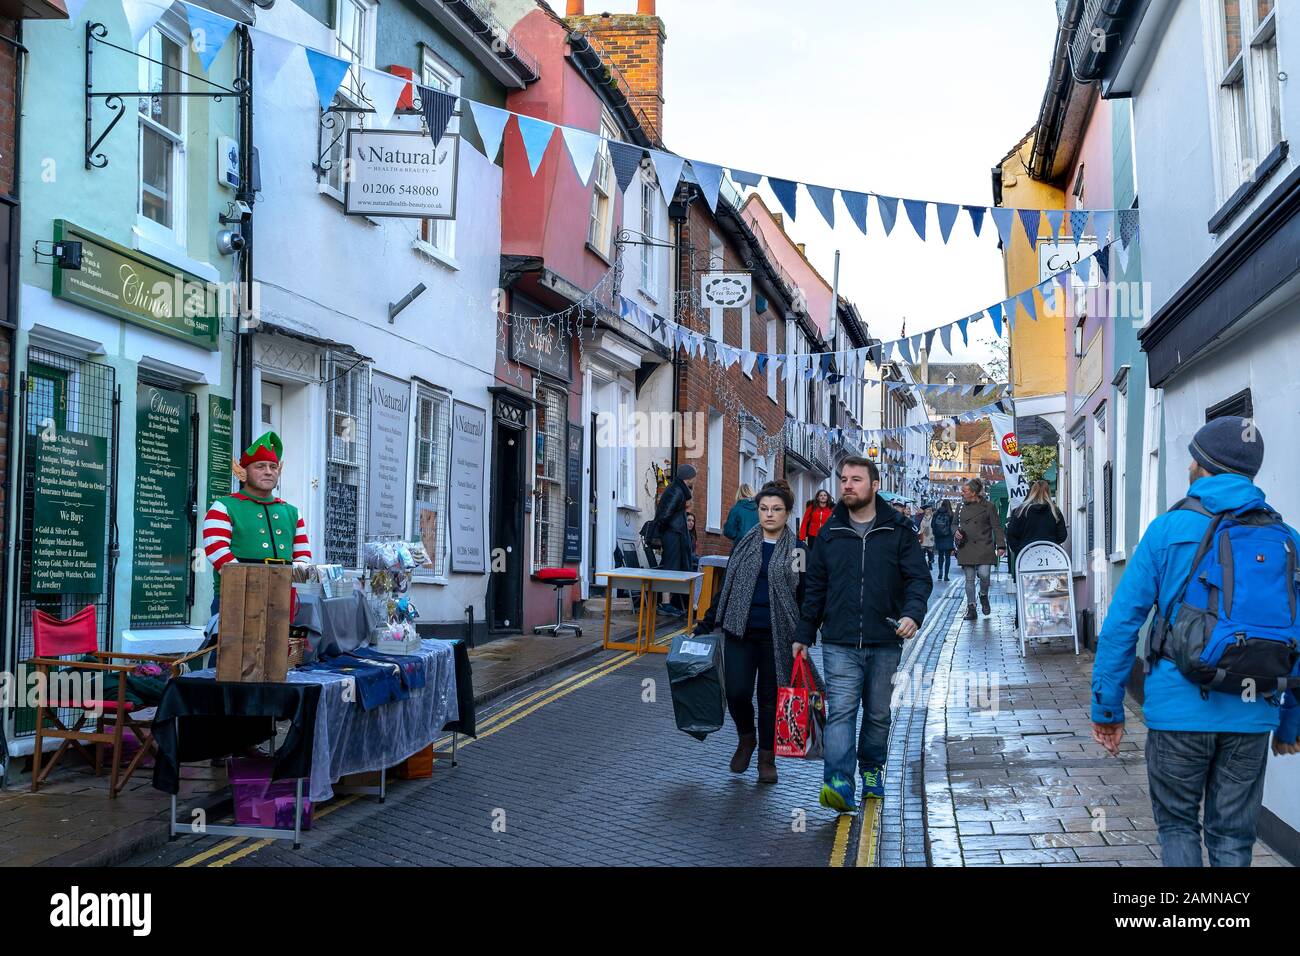 COLCHESTER, TRINITY STREET XMAS MARKET WITH SHOPPERS WALKING DOWN THE STREET Stock Photo